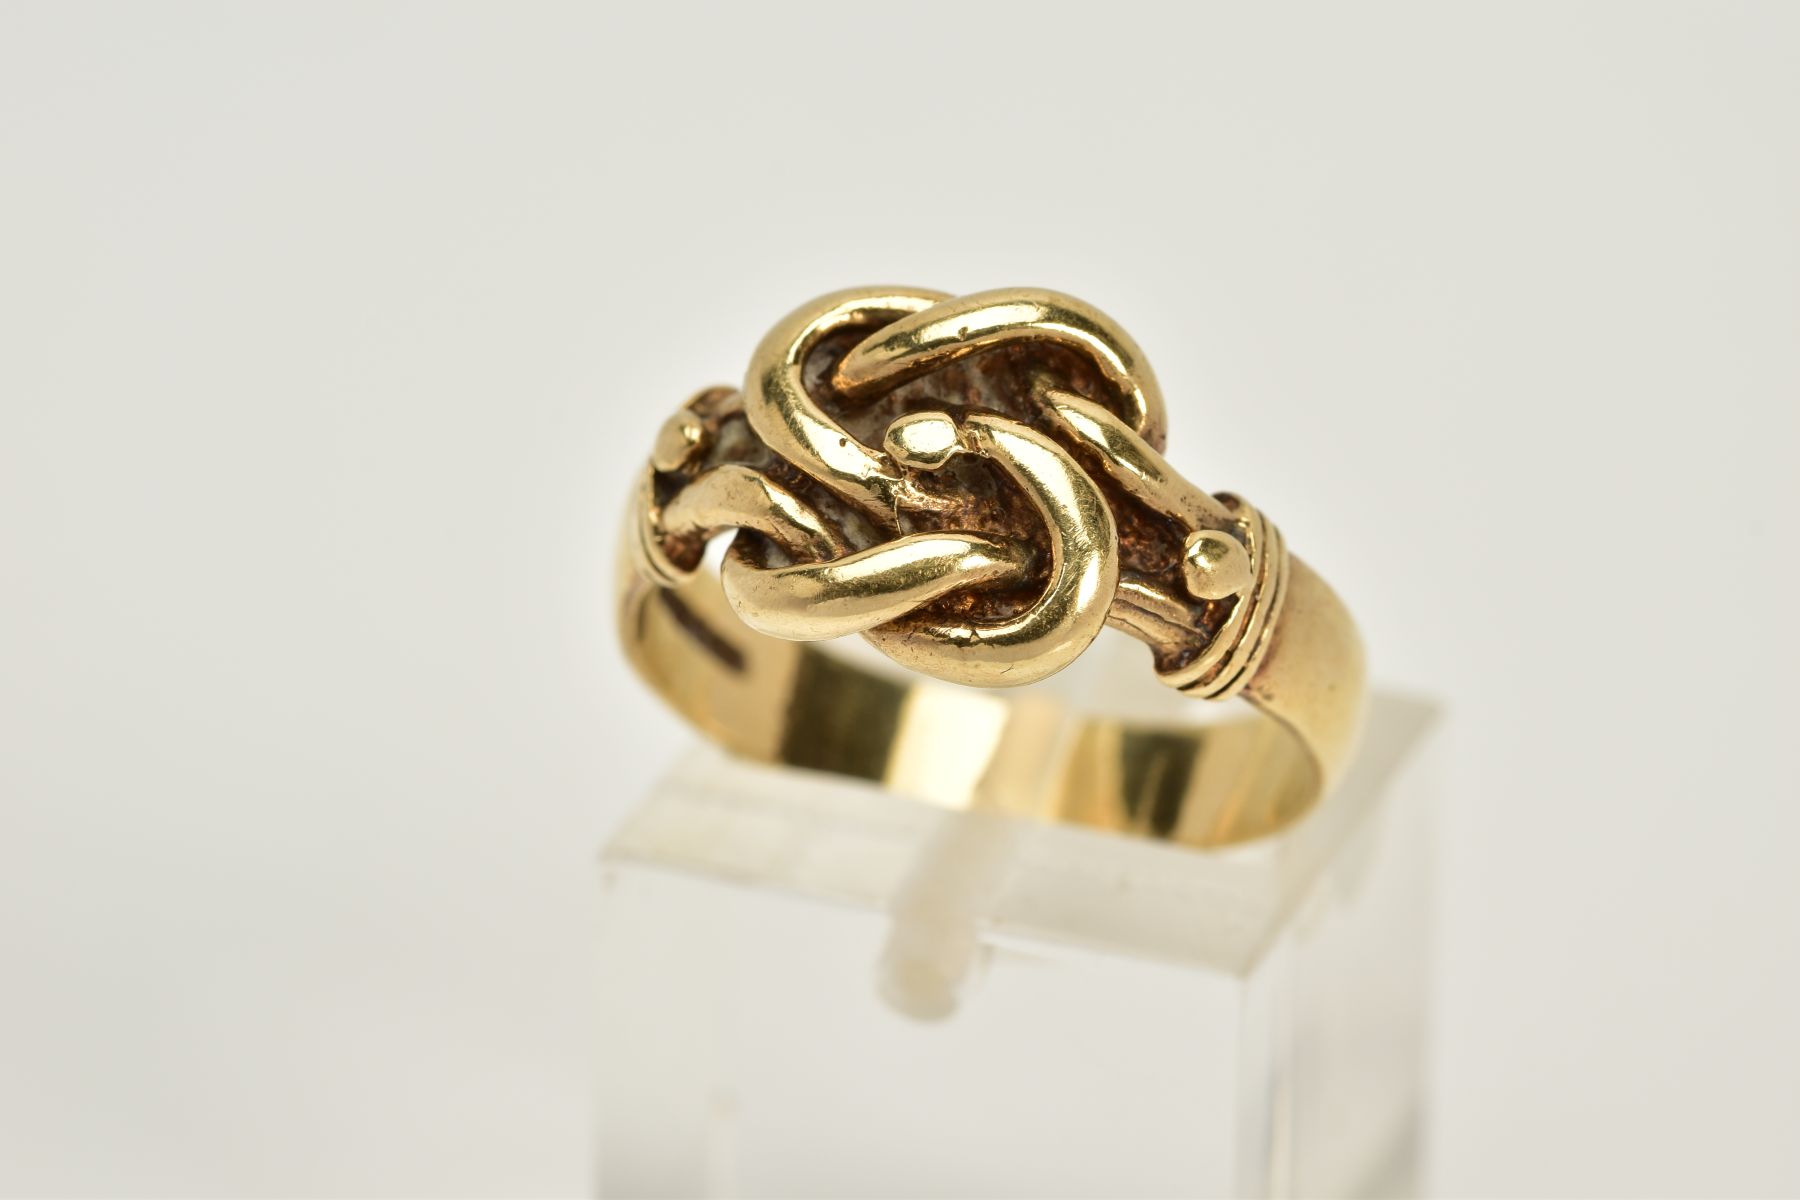 A 9CT GOLD KNOT RING, with a plain polished wide band, hallmarked 9ct gold London, ring size O,